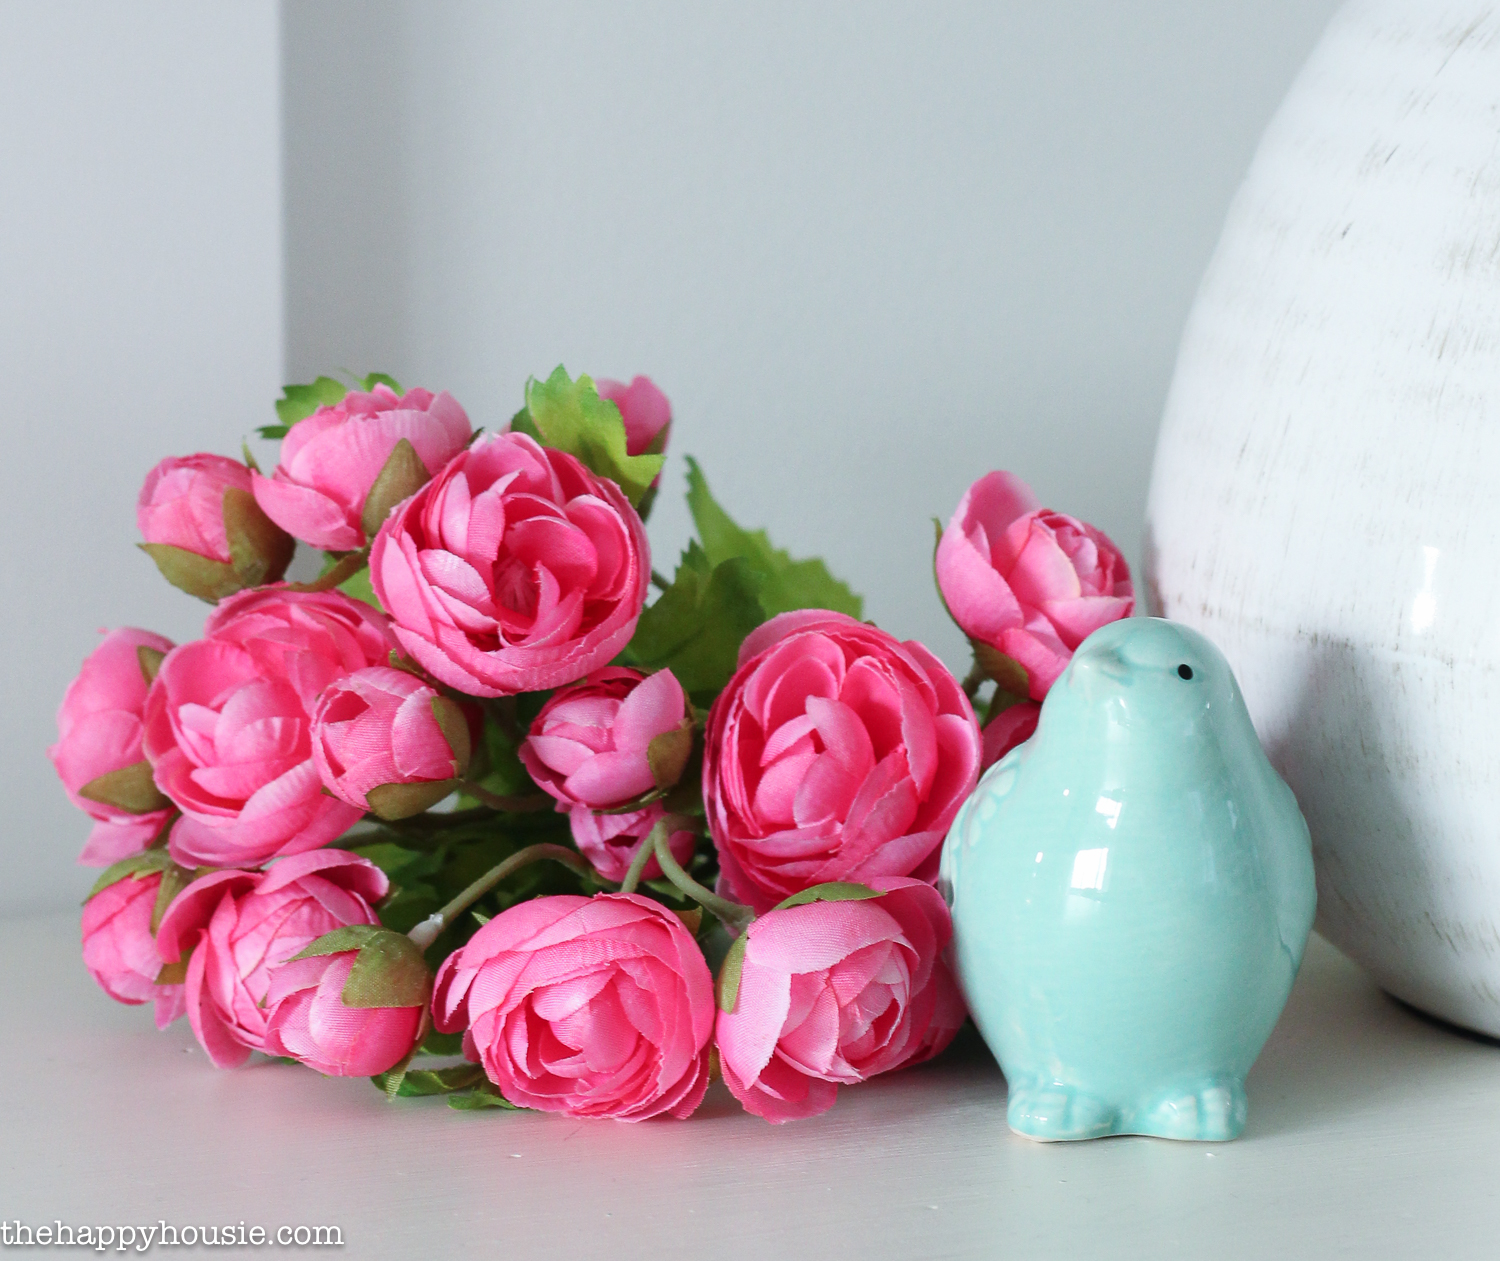 Up close picture of pink flowers and a blue ceramic bird.